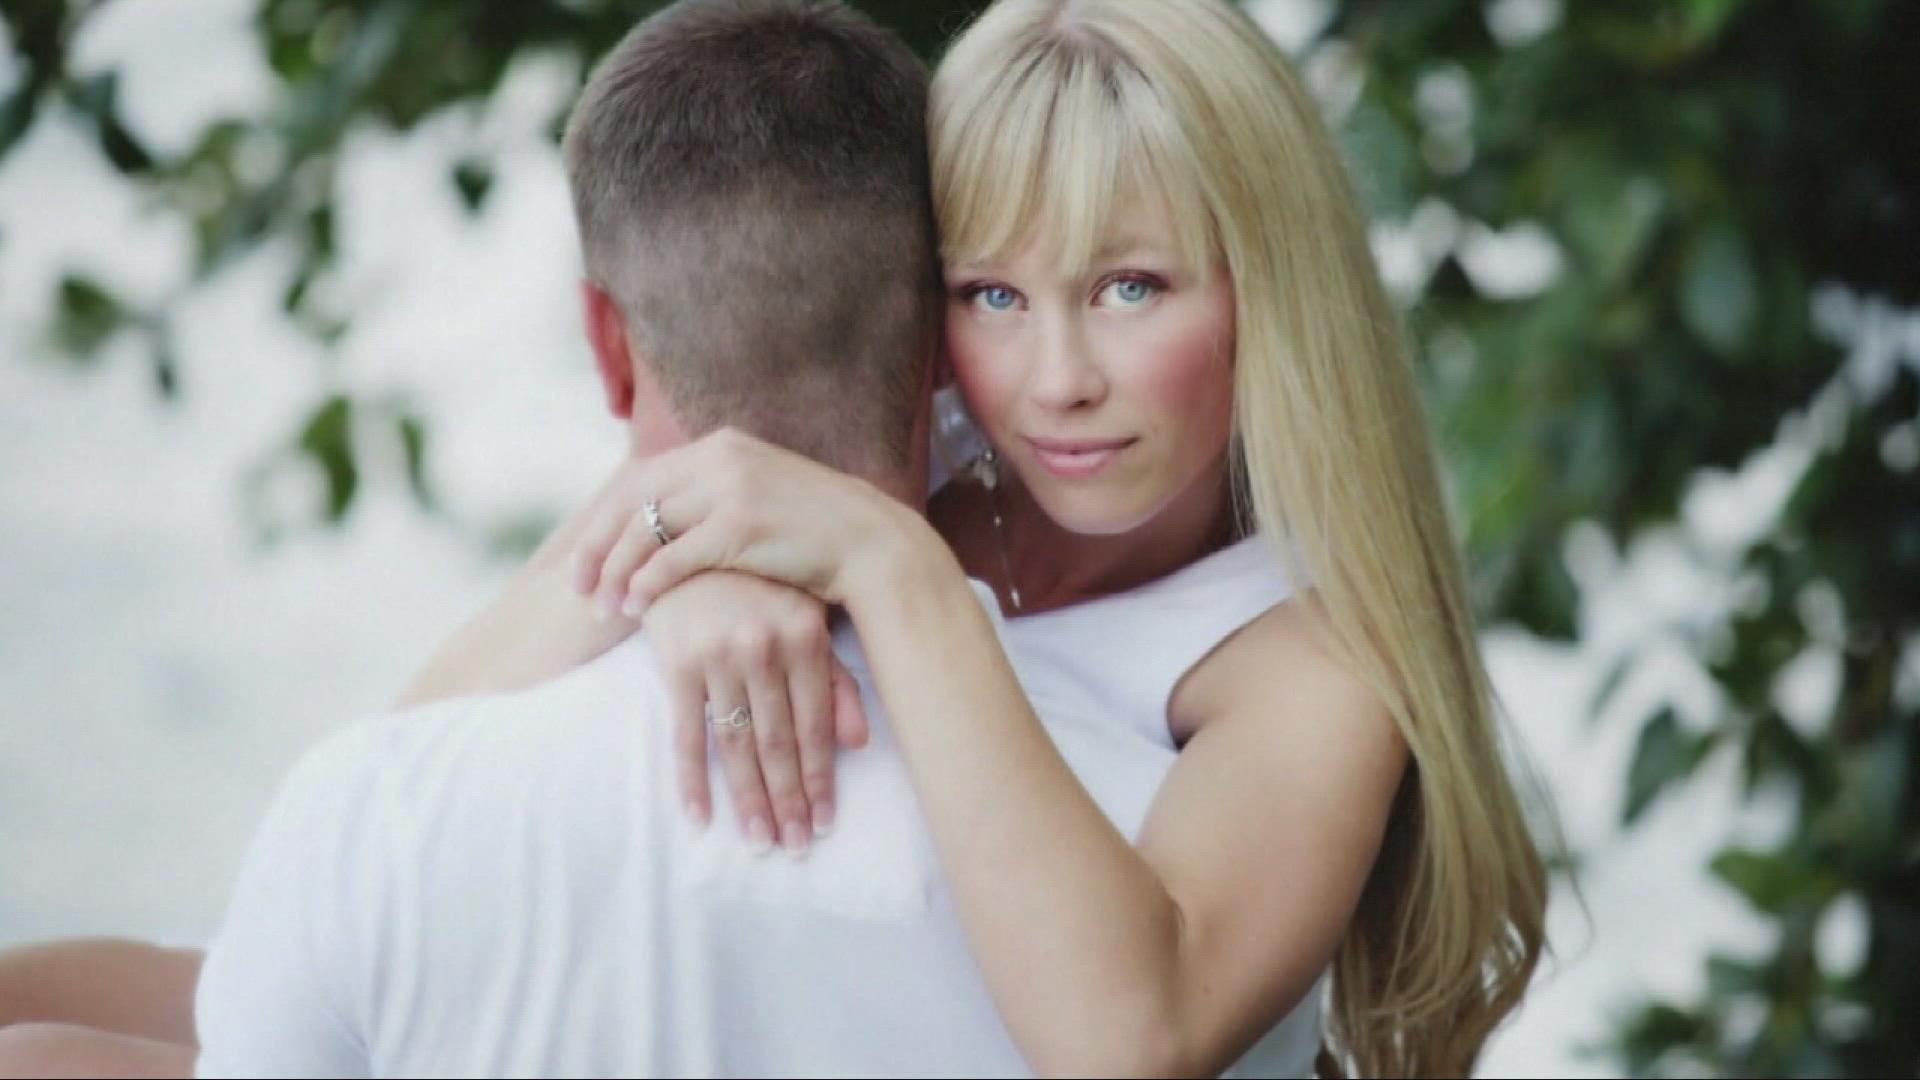 Sherri Papini Update Redding mother to spend 18 months behind bars for